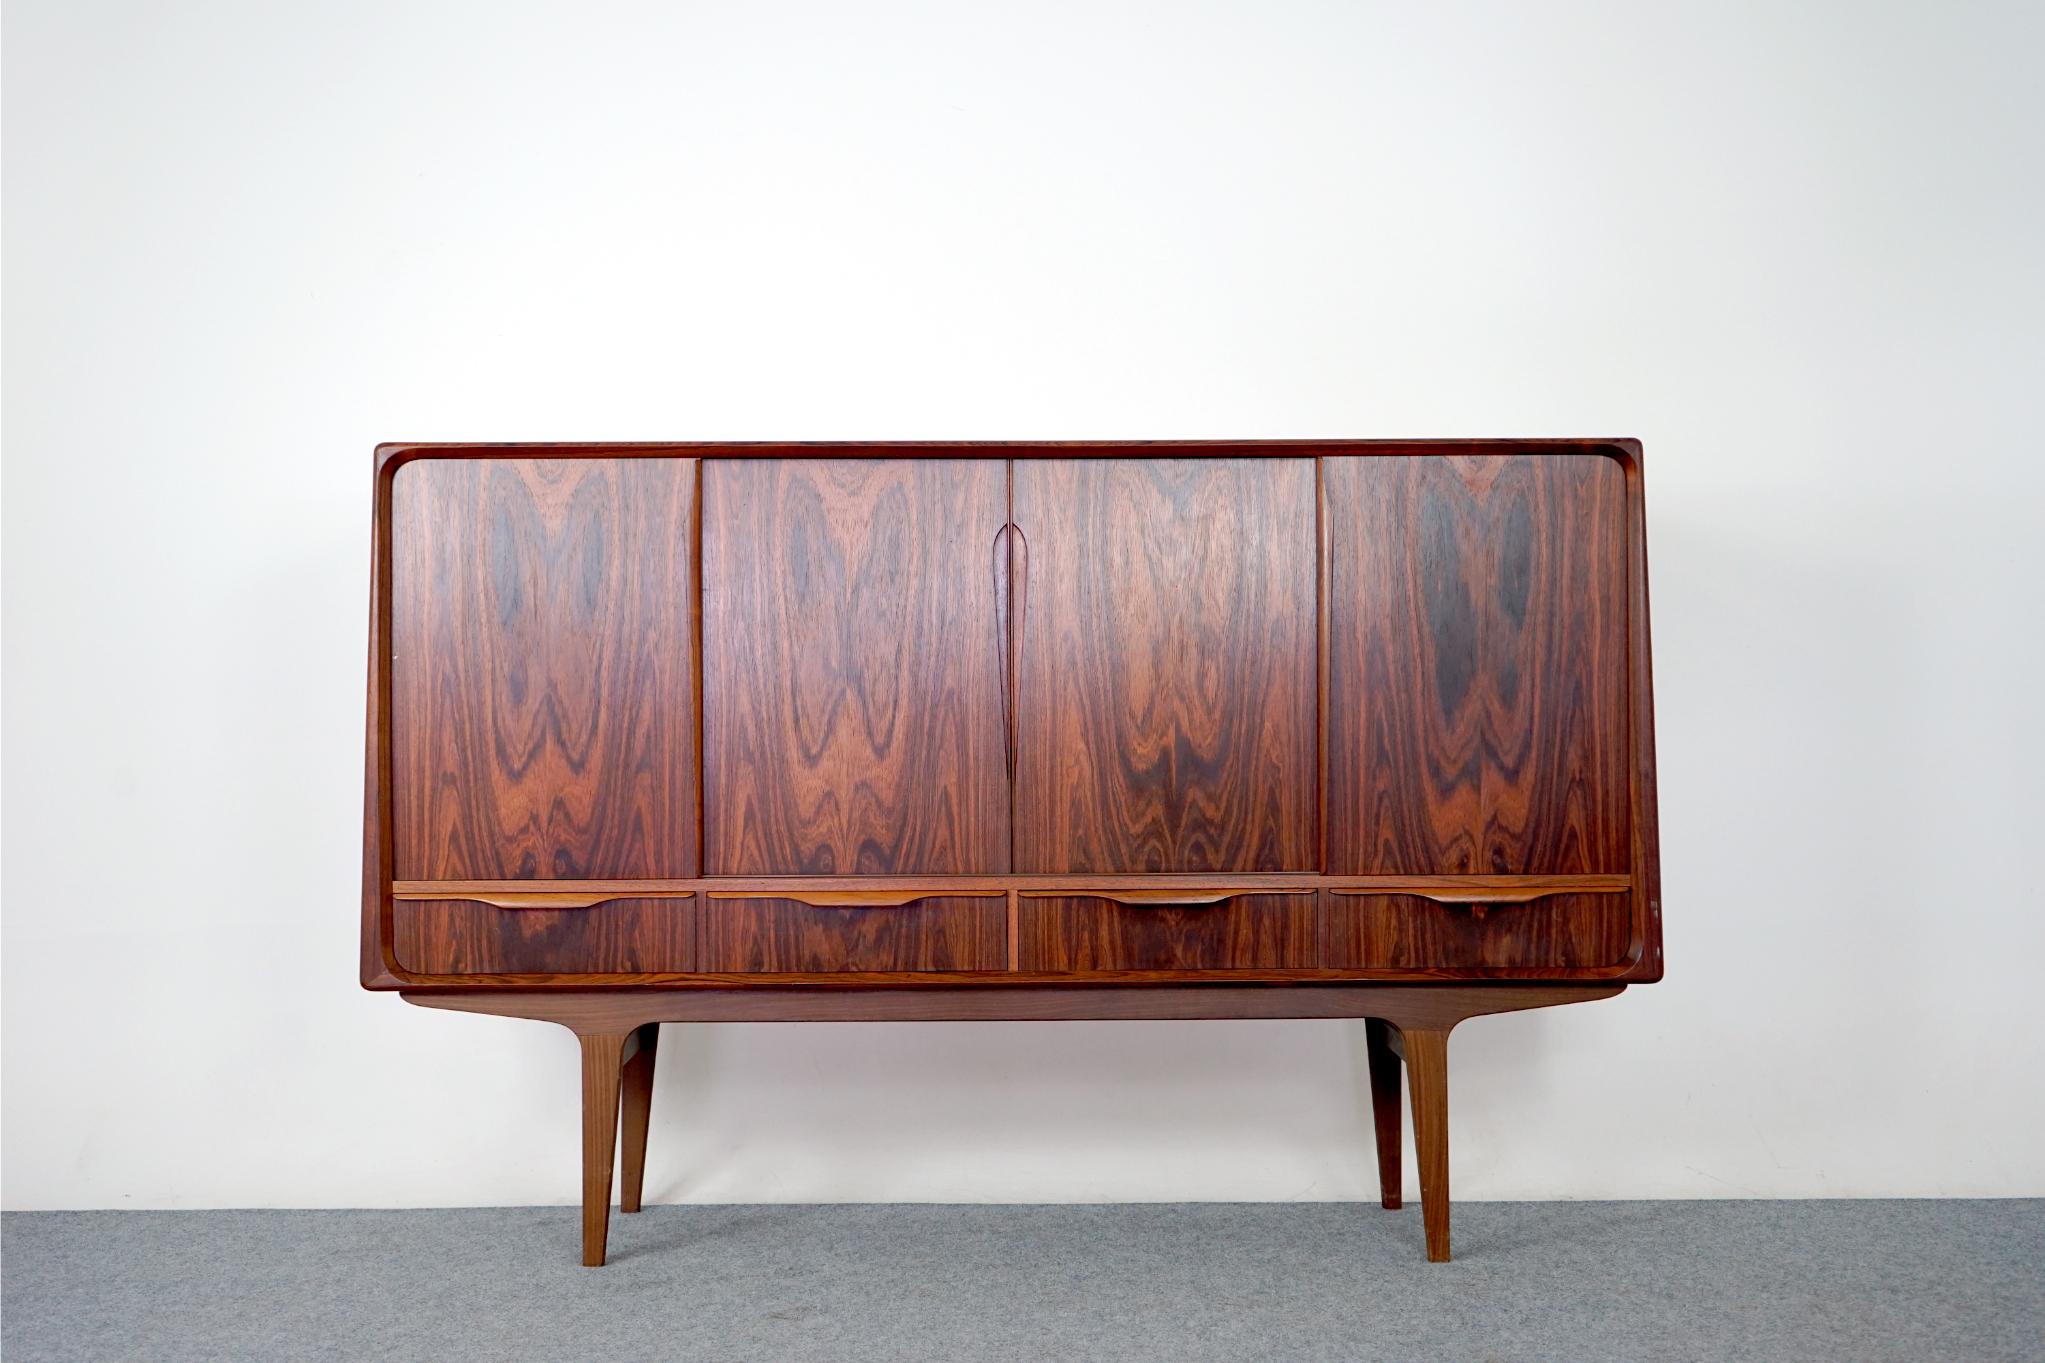 Rosewood mid century sideboard, circa 1960's. Clean, simple lined design highlights the exceptional book-matched veneer throughout. The elegant sleek, unique handles elevate this quality piece. A combination of sliding doors and exterior drawers,